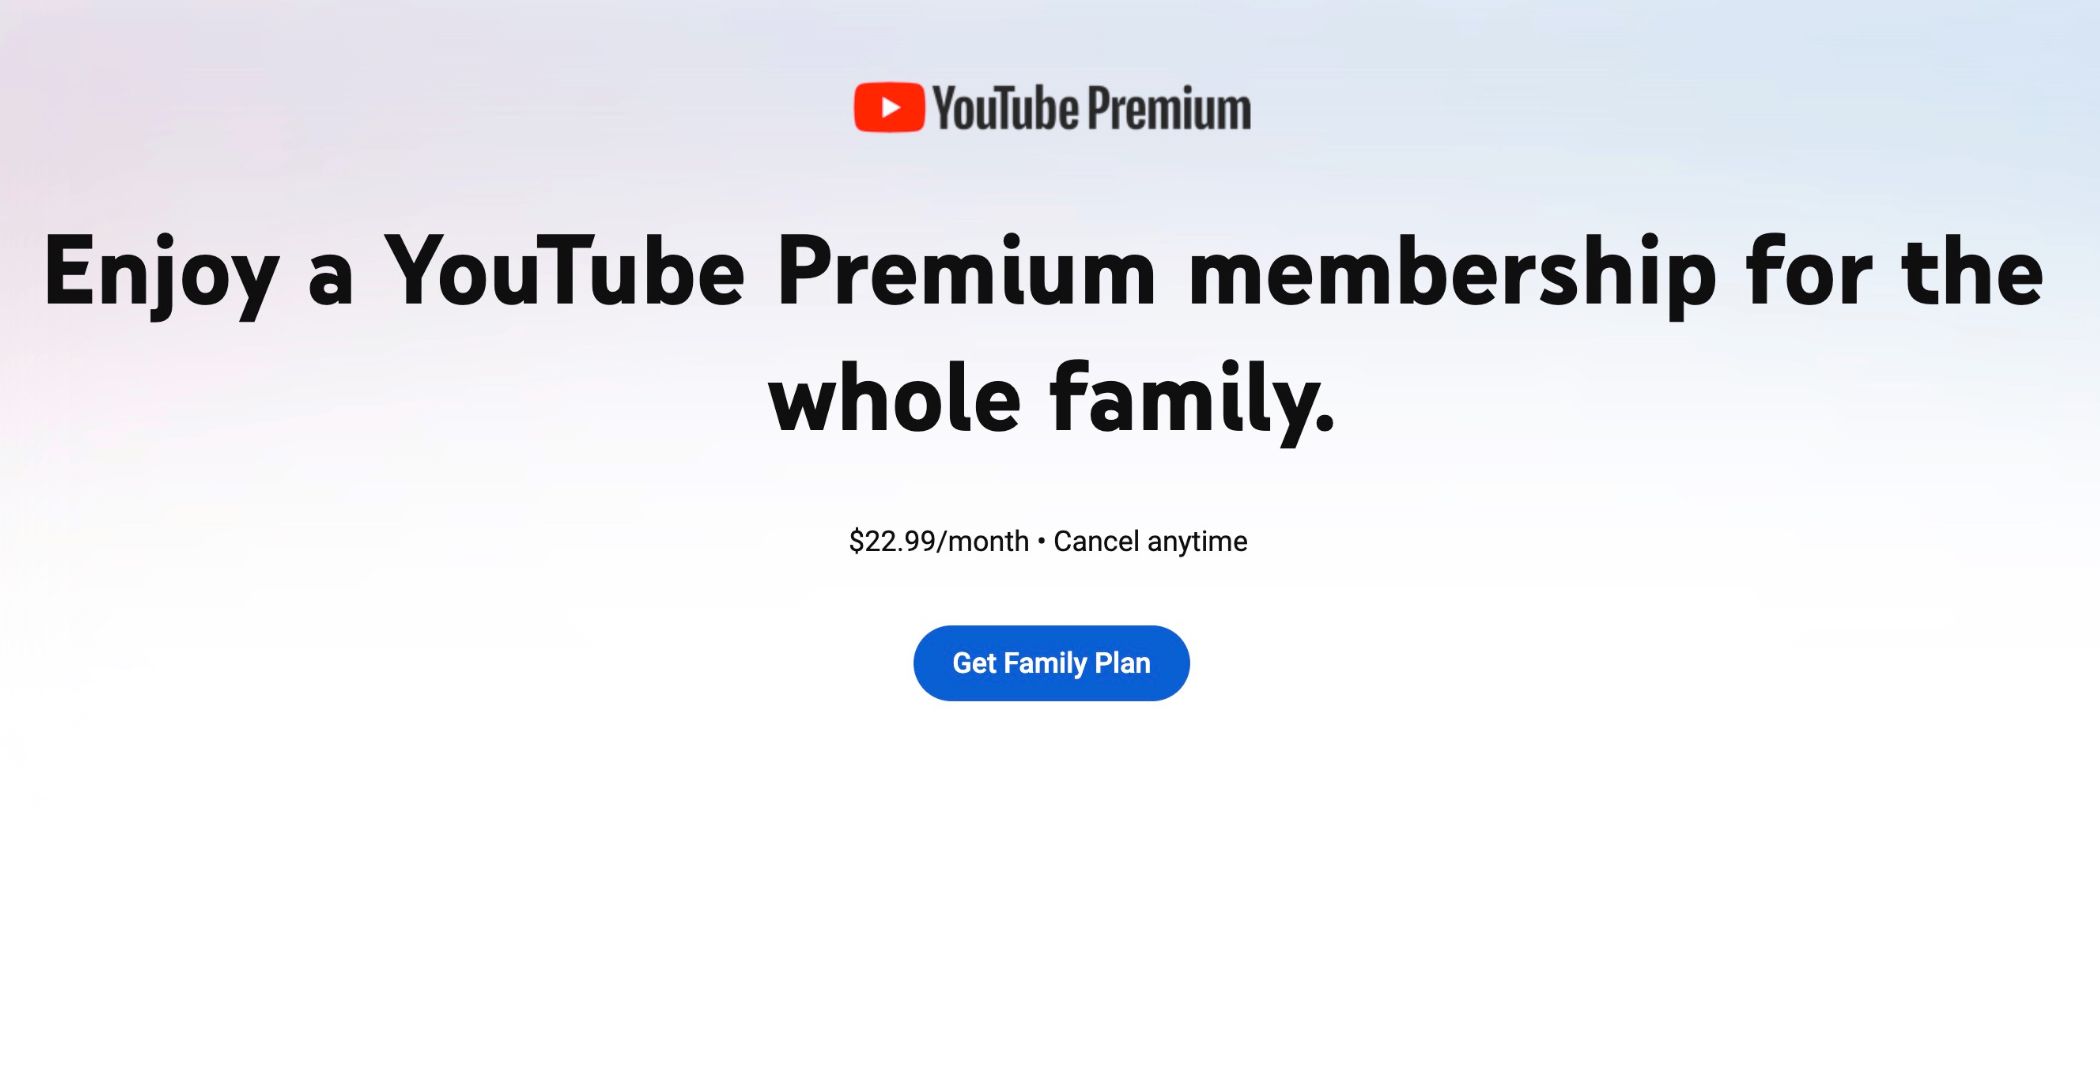 YouTube Premium pricing for families.